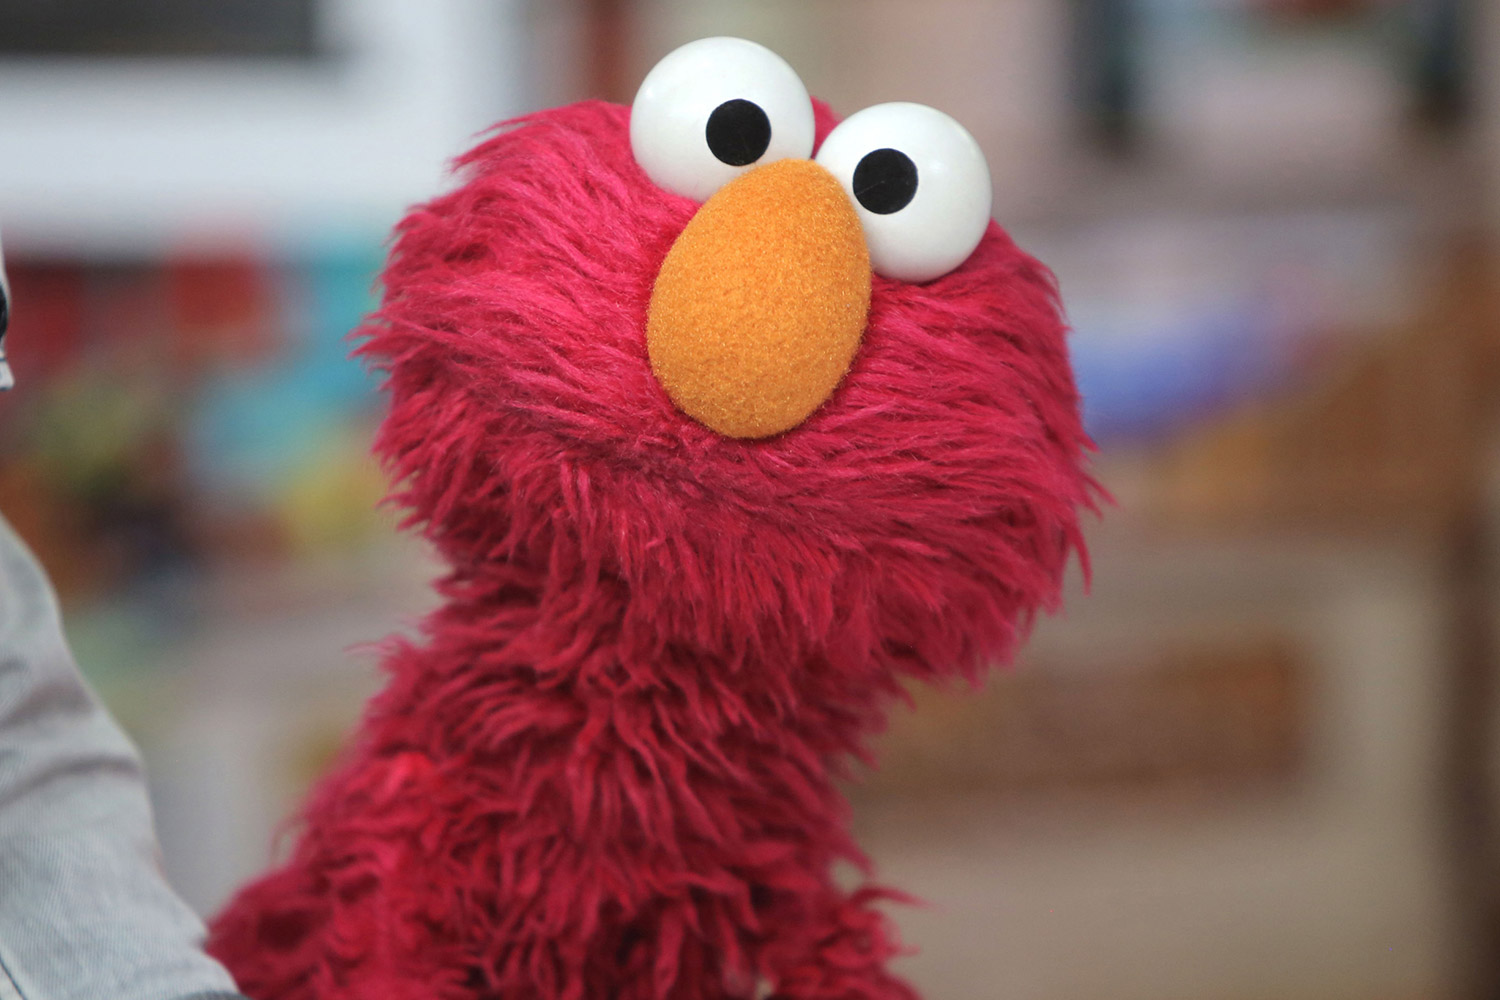 Elmo From Sesame Street To Host Virtual Play Date To Comfort Kids